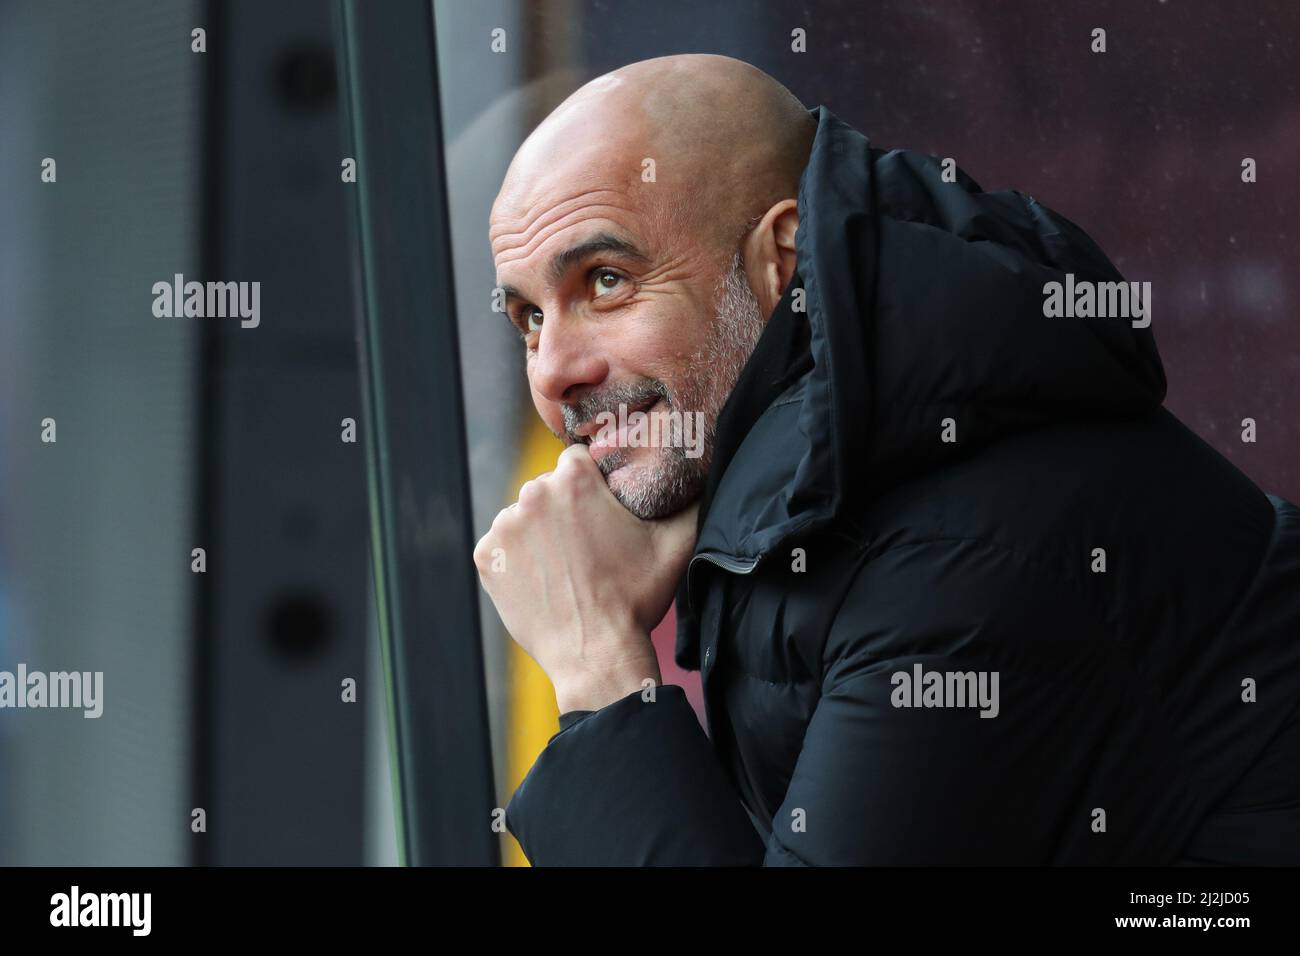 PEP GUARDIOLA, MANCHESTER CITY FC MANAGER, 2022 Stock Photo